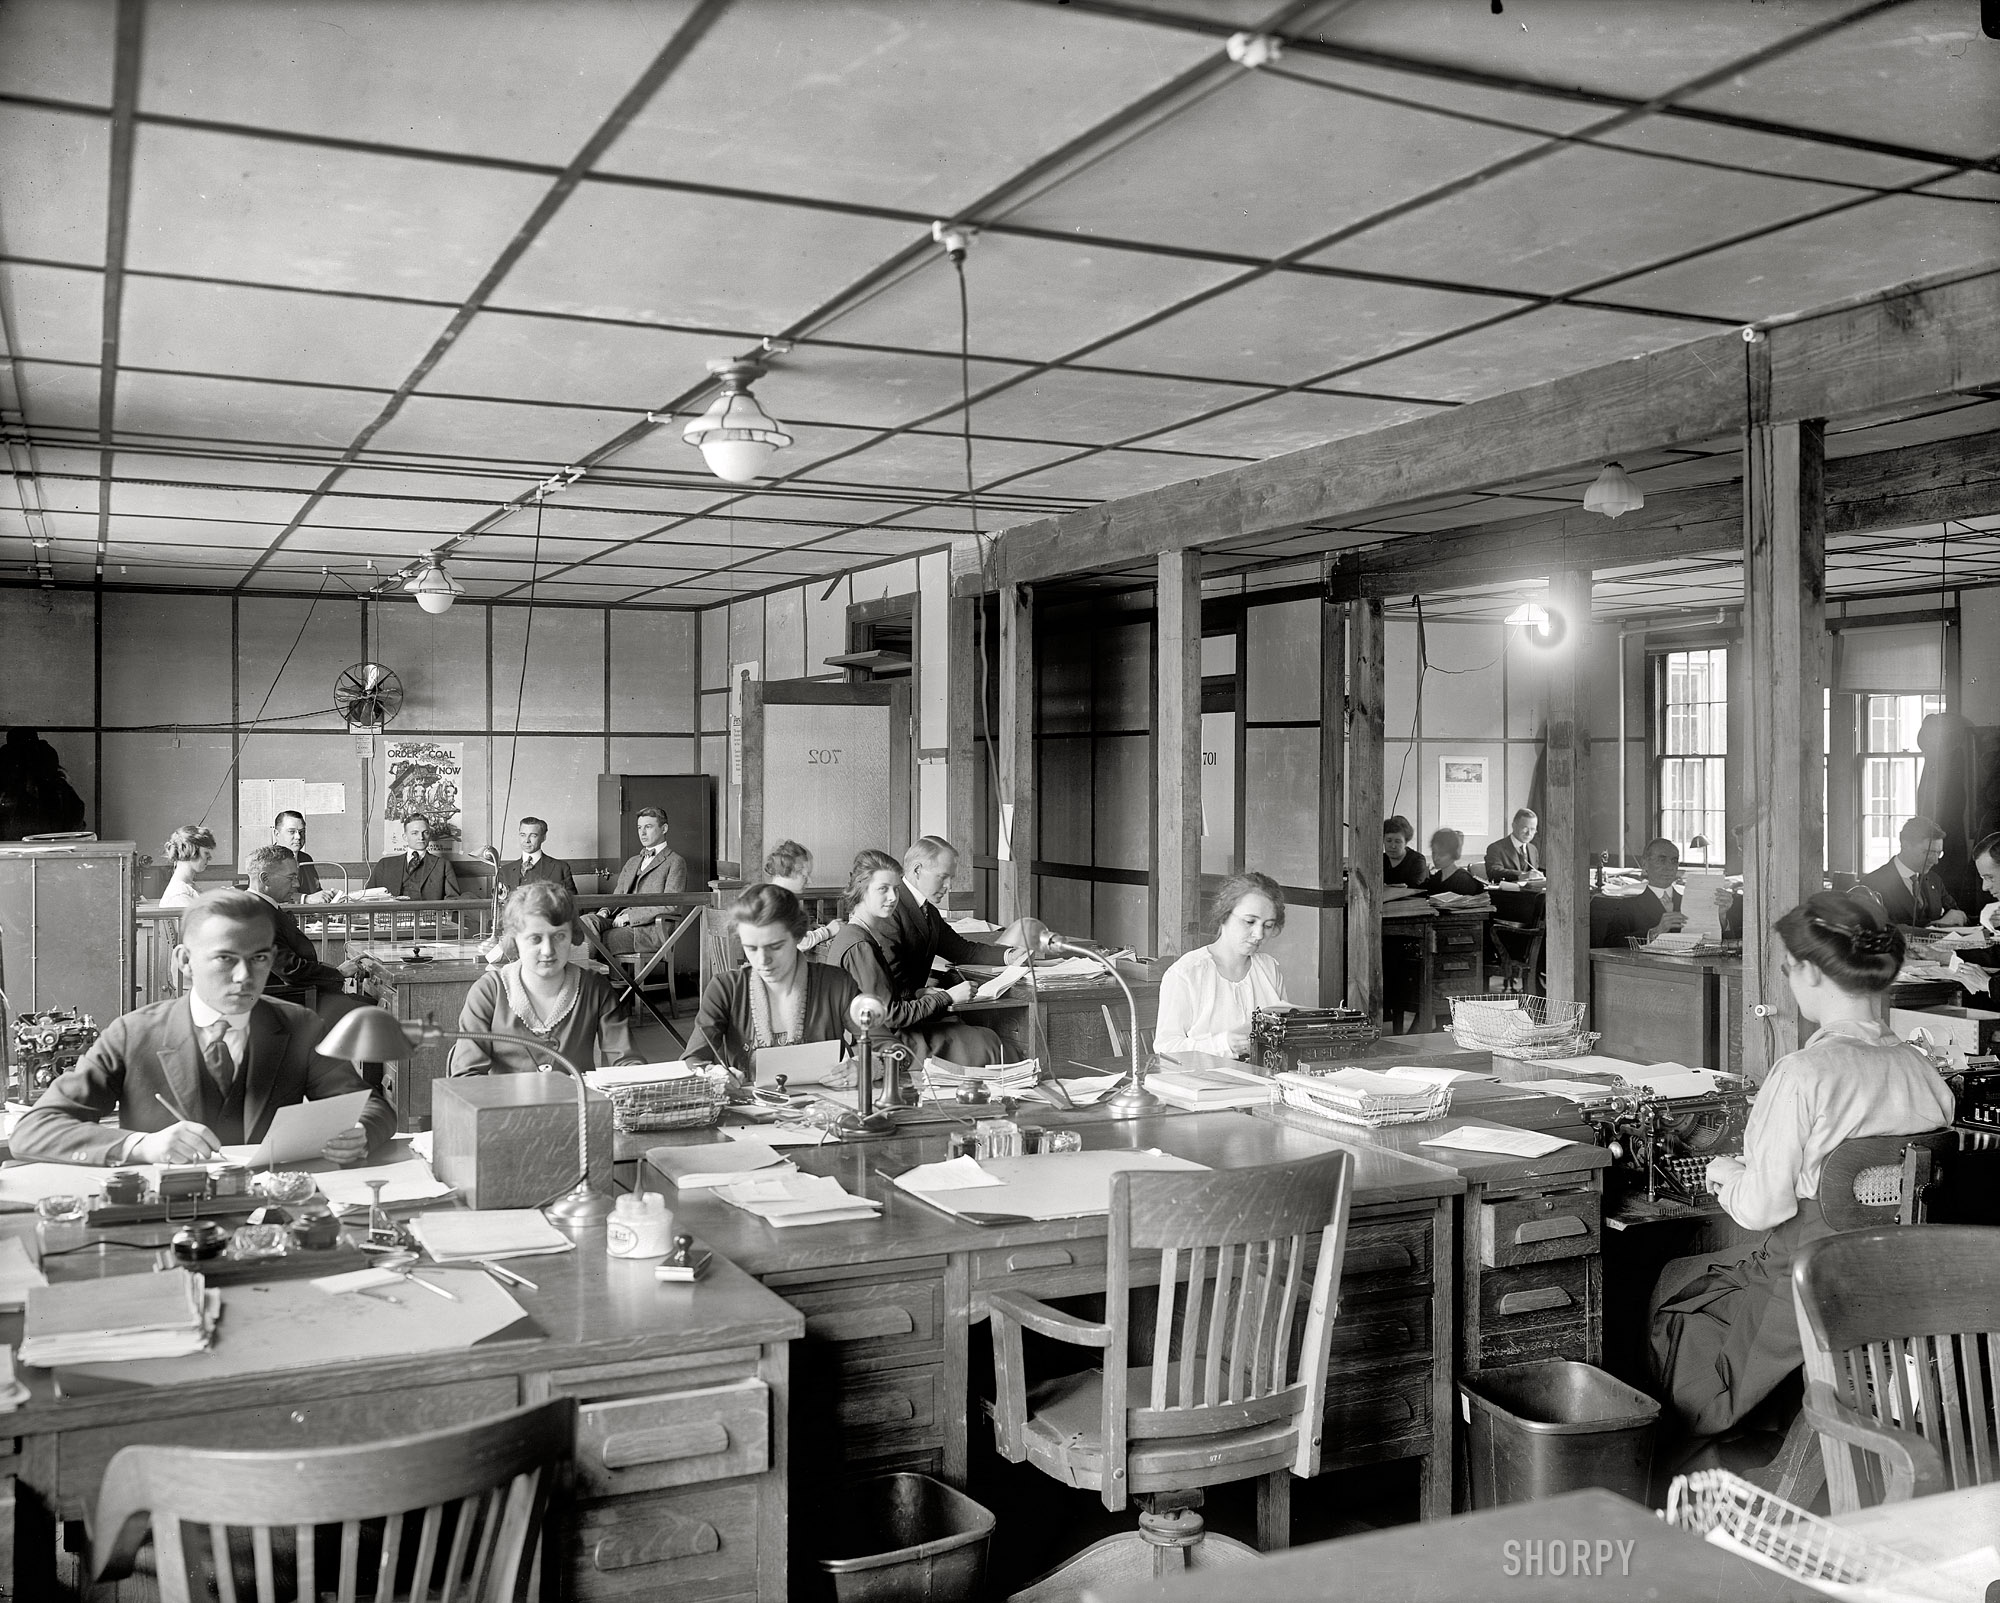 Washington, D.C., circa 1919. "U.S. Fuel Administration." Whose turn is it to clean out the microwave? Harris & Ewing Collection glass negative. View full size.